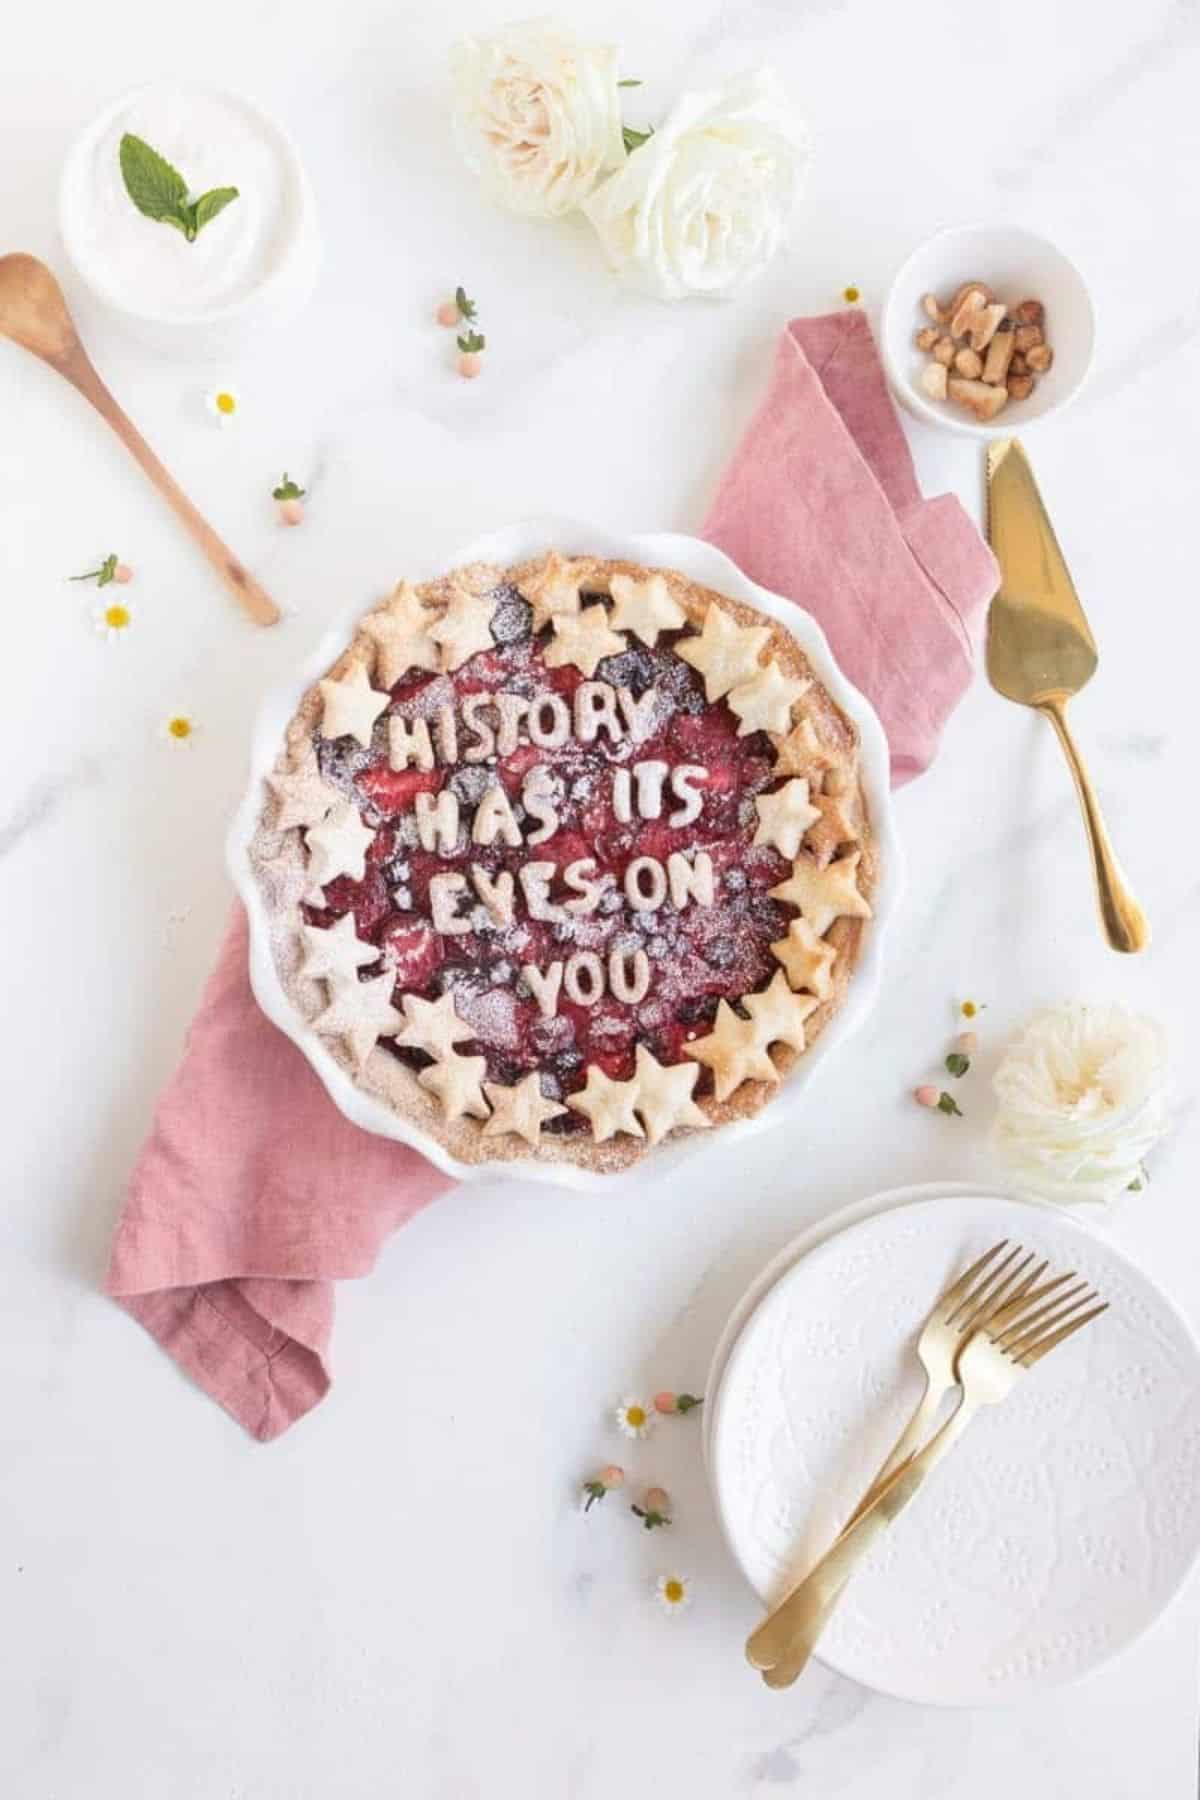 Mixed Berry Pie with Lettered Top